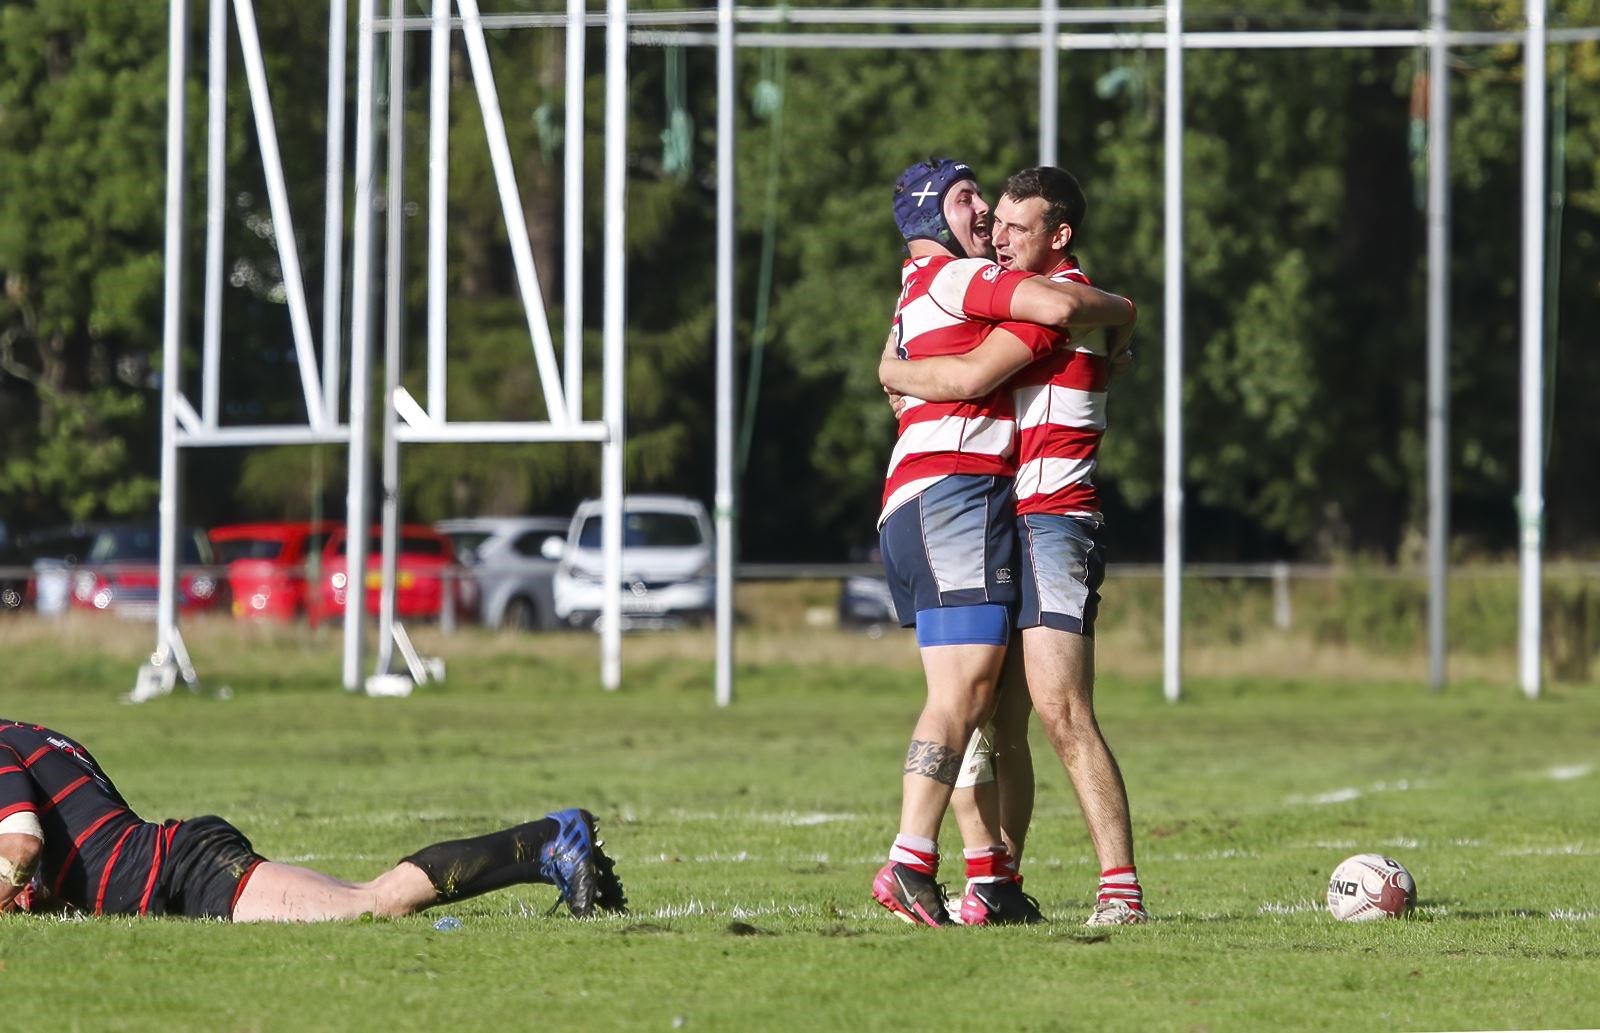 An embrace between Connor McWilliam and Archie Duncan after Duncan scored his try. Photo: John MacGregor